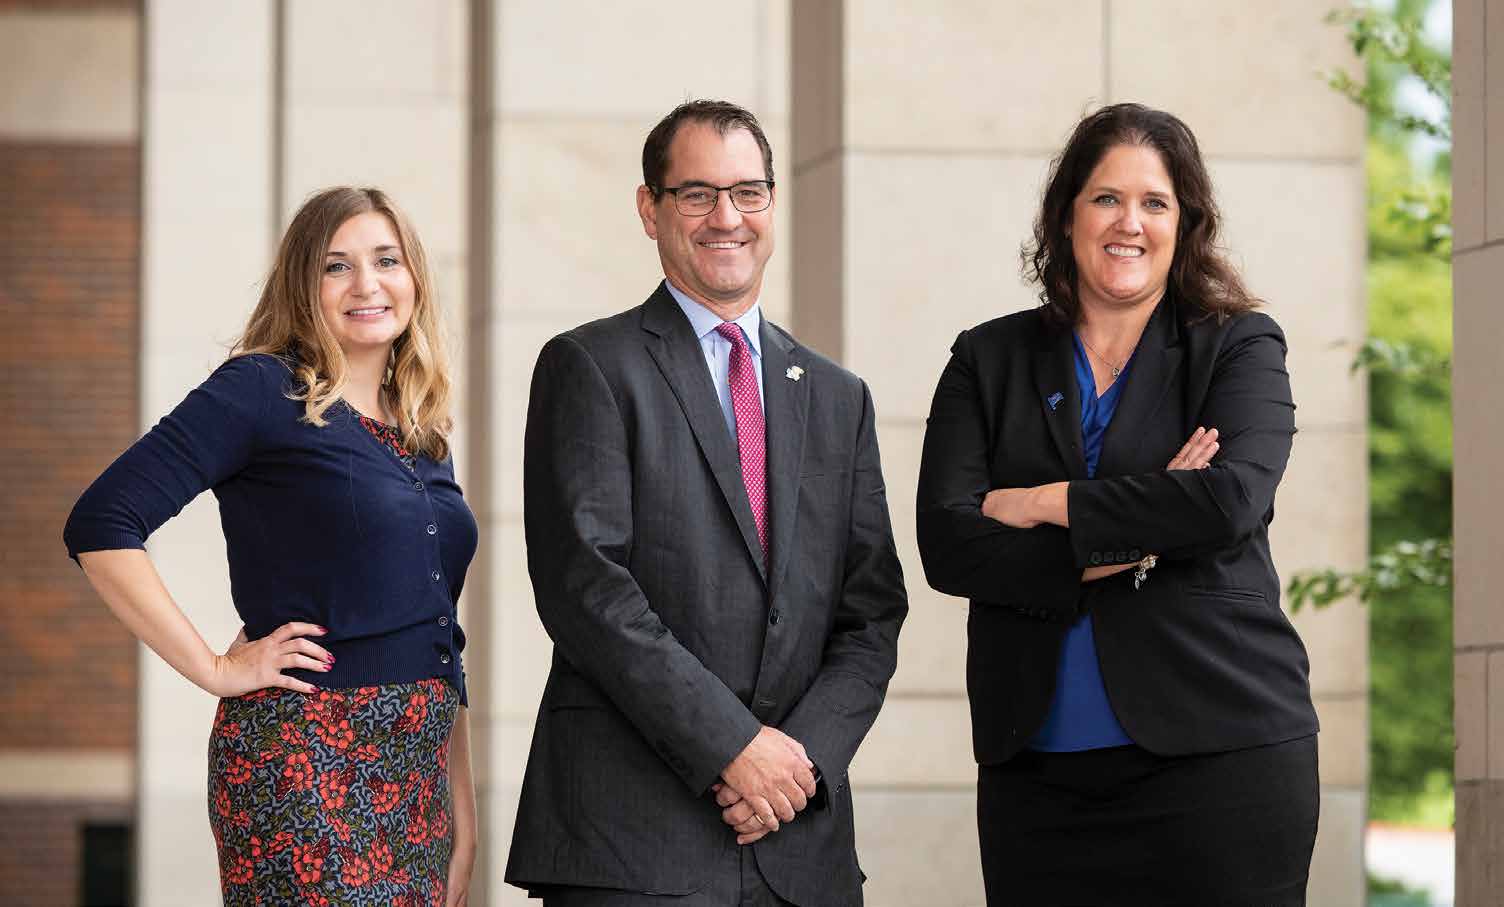 Lauren McEnaney, David Cook and Carolyn McKnight believe the program offers career-oriented students in Kansas City a cost-efficient way to attend KU. Photo by Steve Puppe.